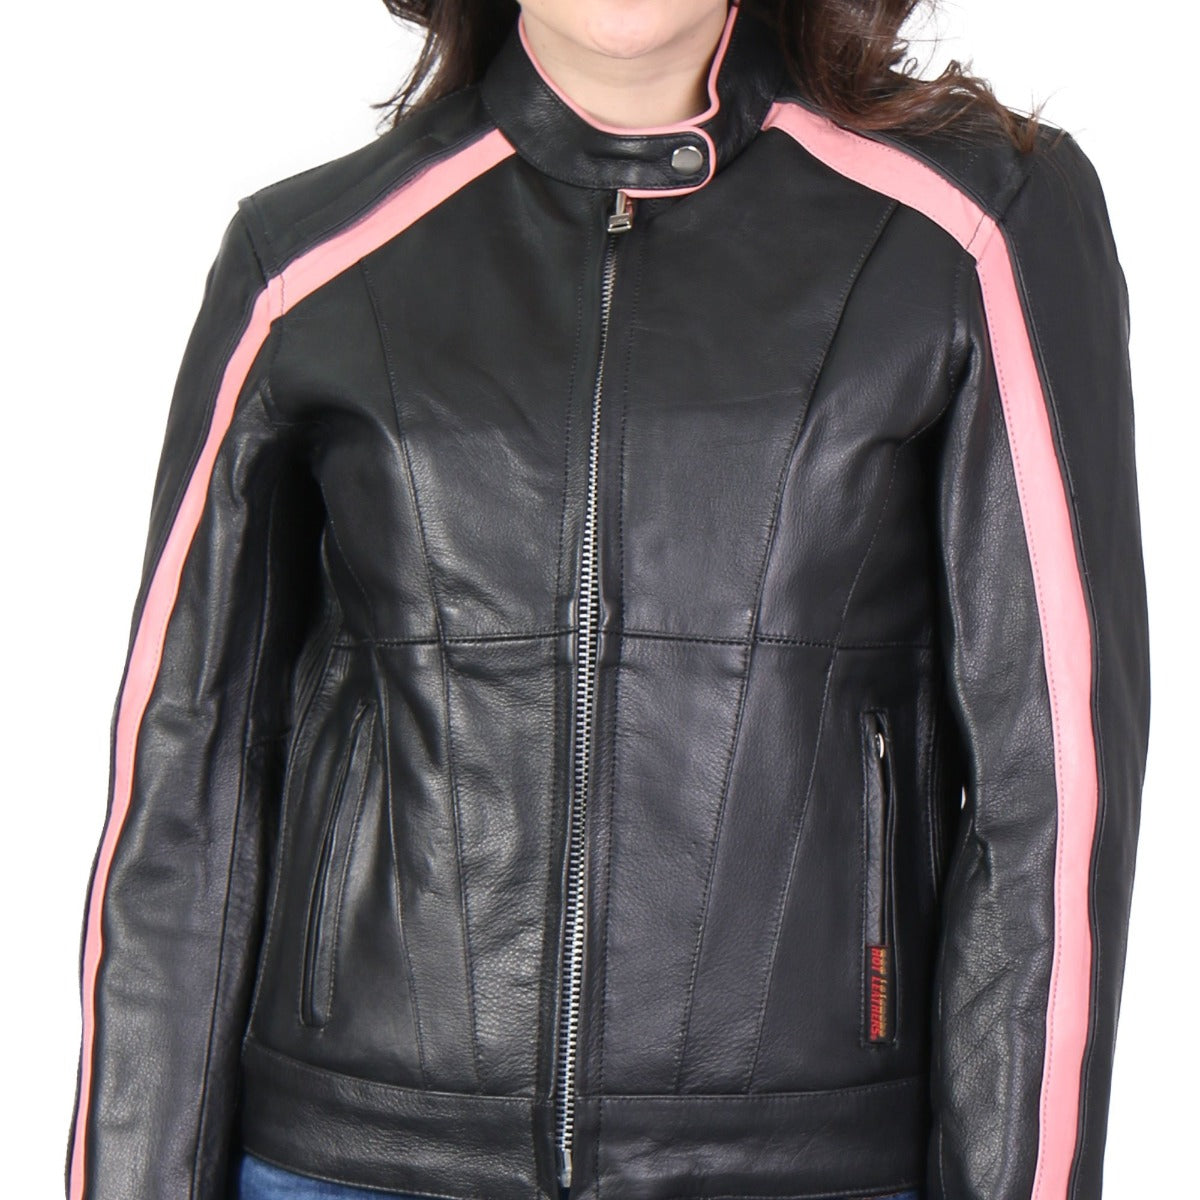 Hot Leathers Women's Pink Striped Leather Jacket With Reflective Piping